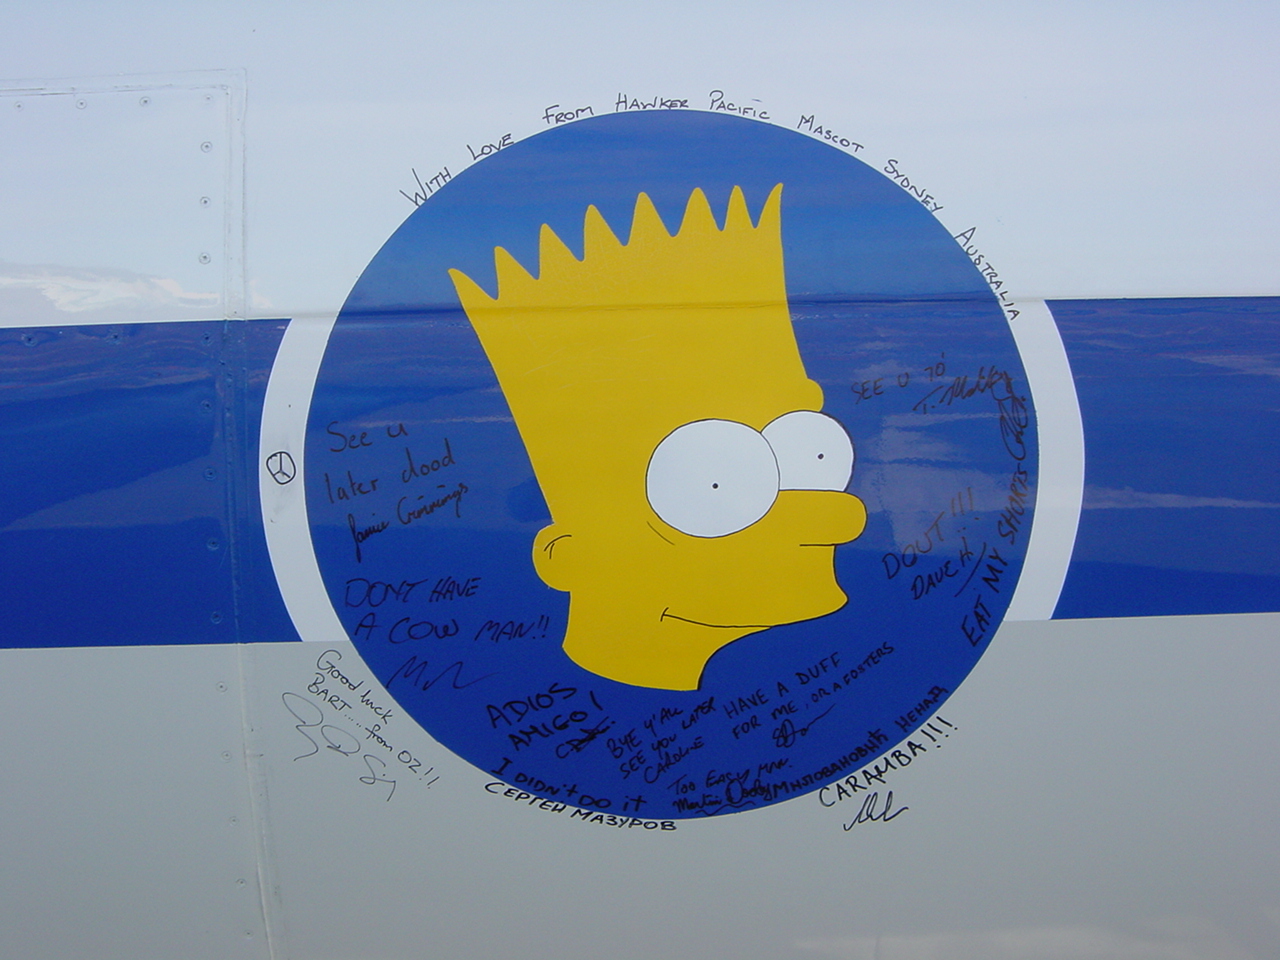 The Simpsons family flying private